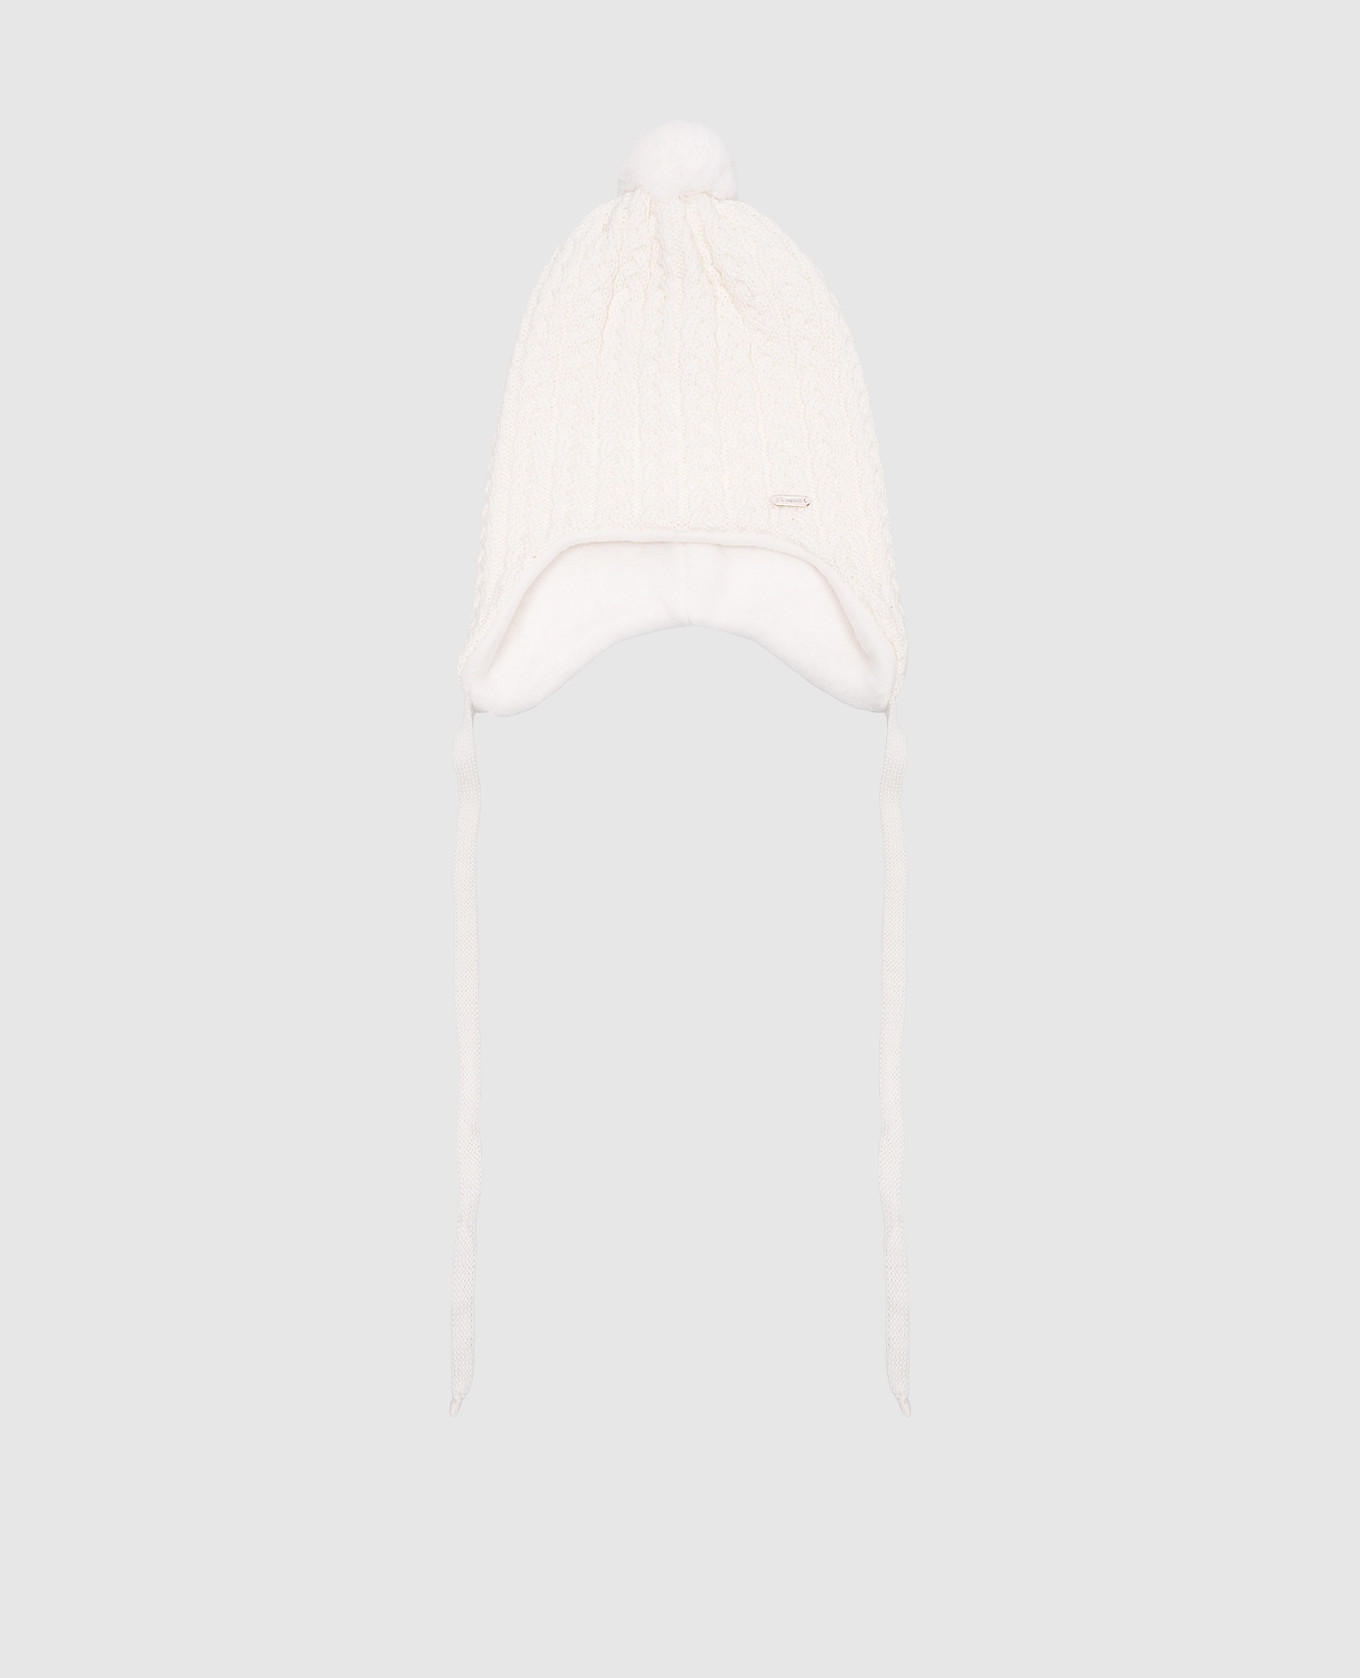 Children's white hat made of wool with a textured pattern